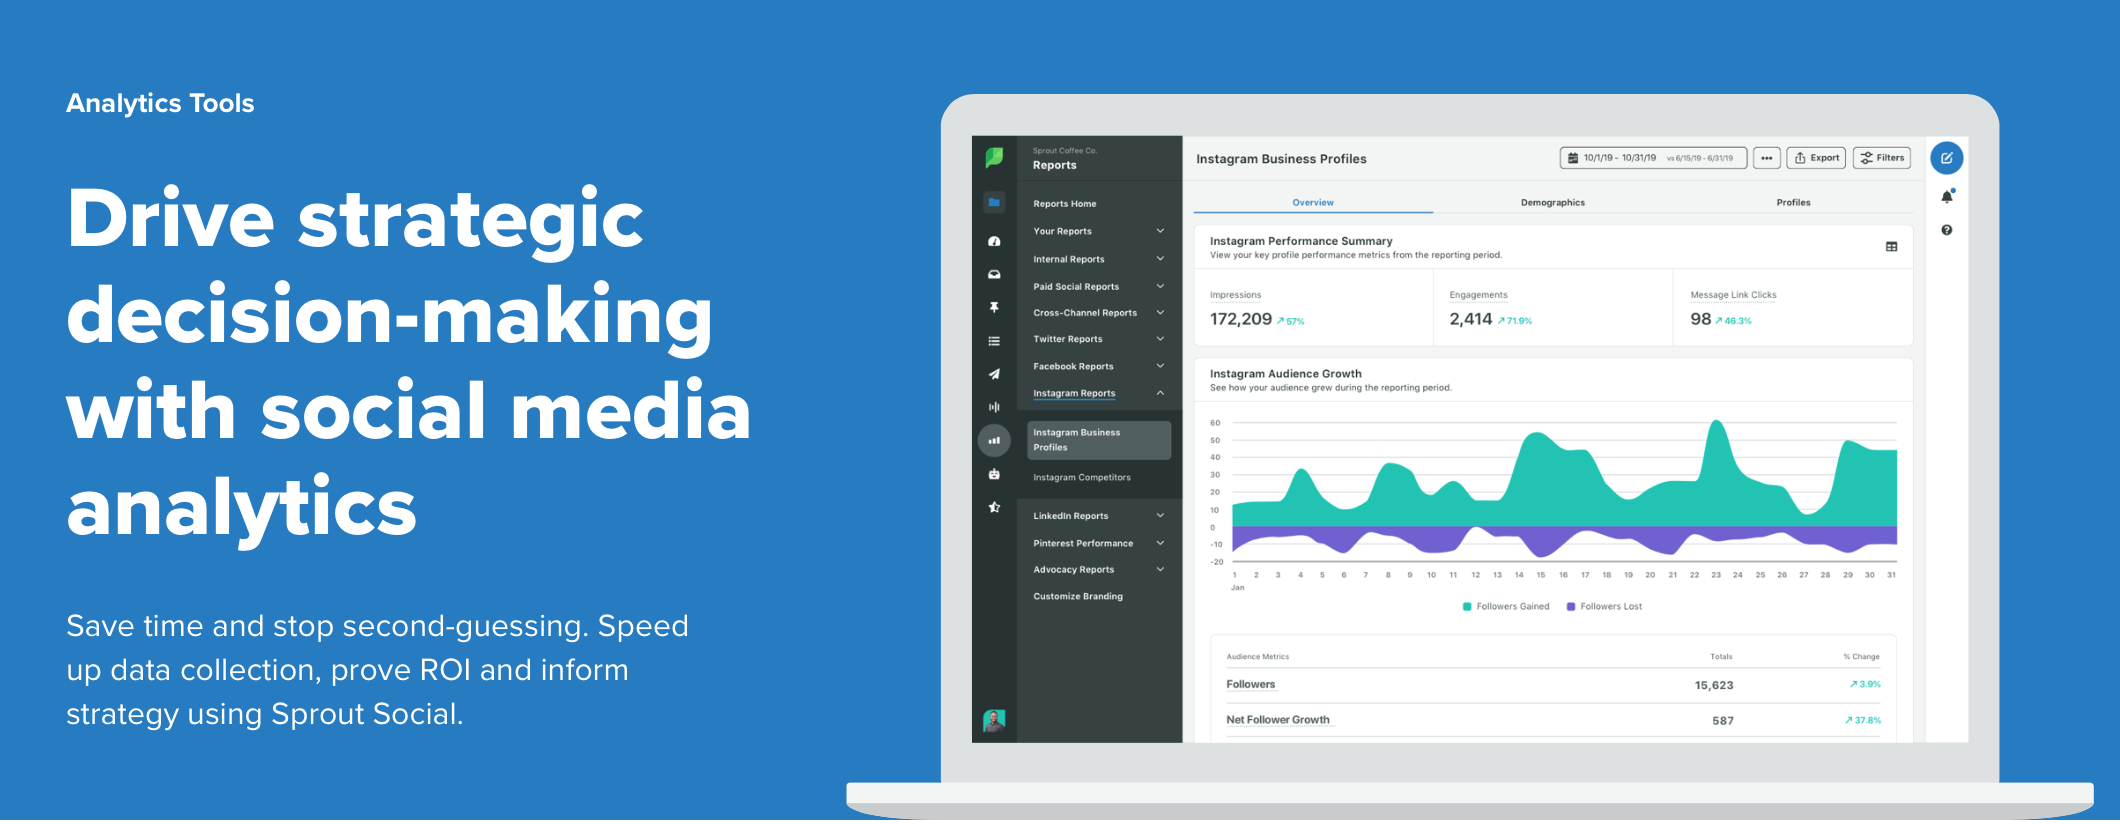 Sprout Social Analytics